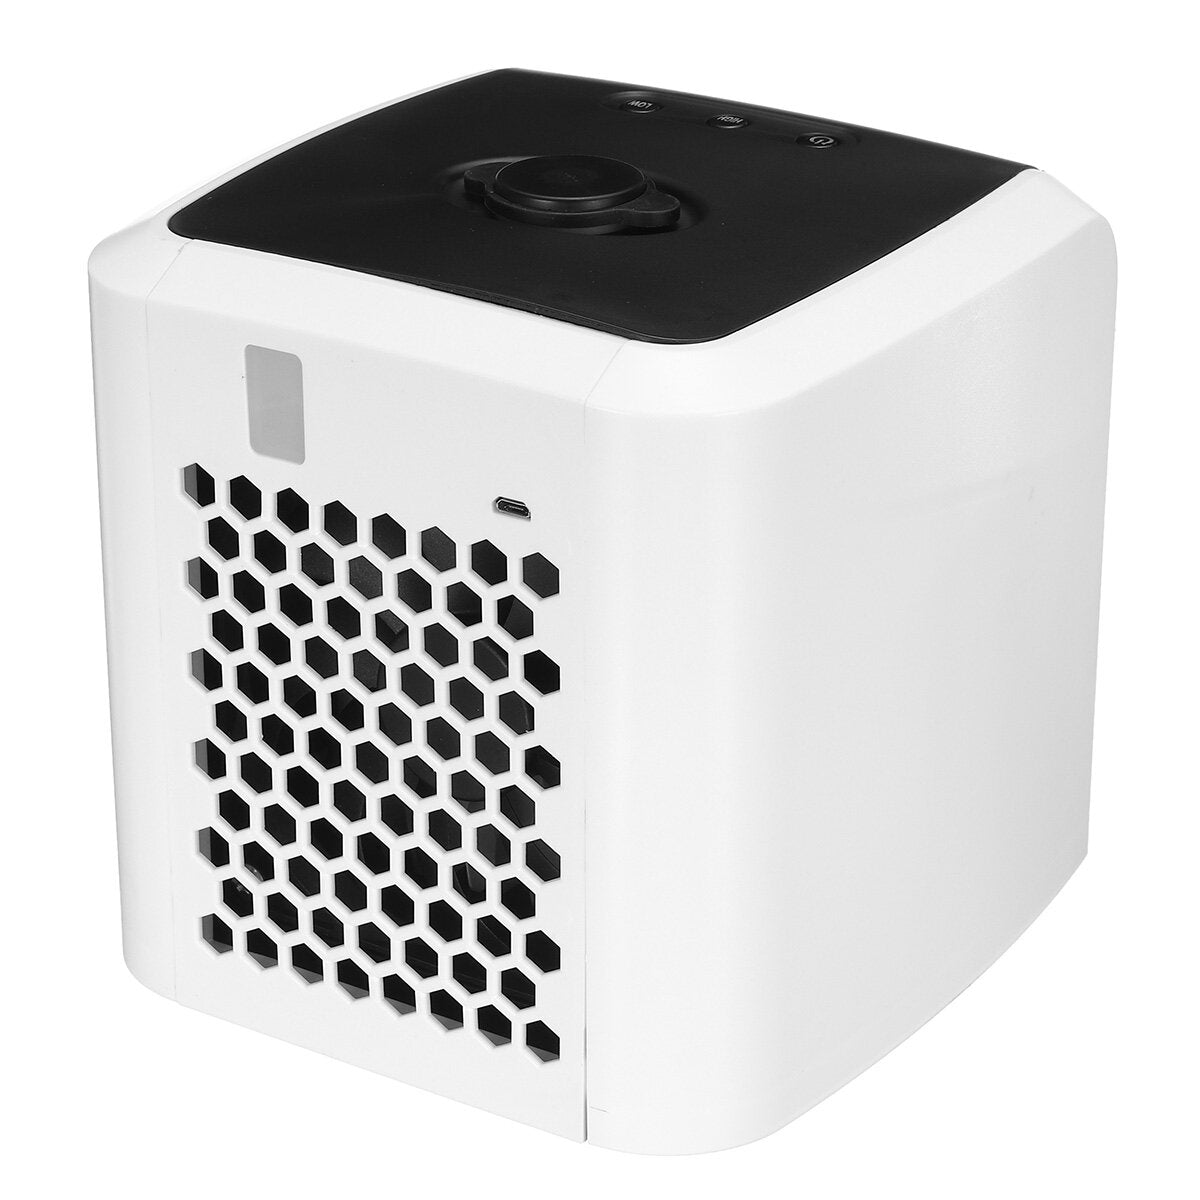 12W Desktop Air Conditioner 2 Gears 90 Adjustable Cooling Fan USB Humidifier Travel Home Office